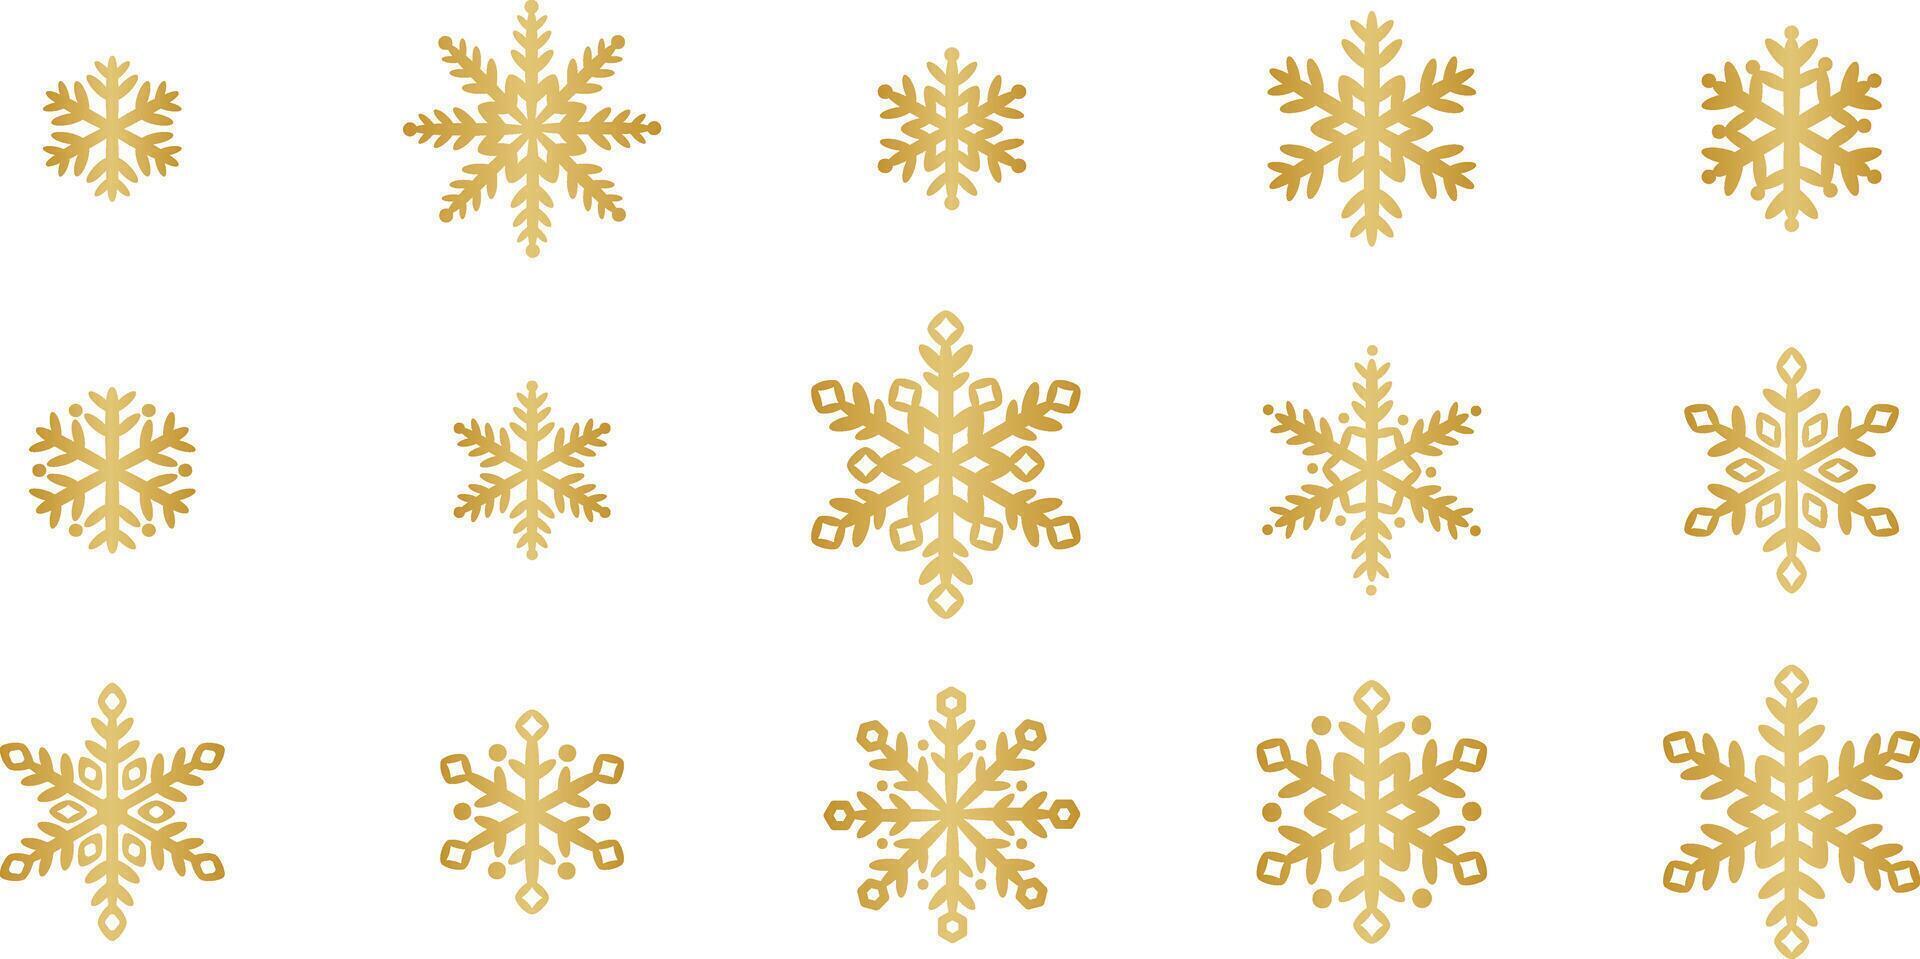 Gold snowflake clip art elements, elegant gradient snow symbol decoration set for the winter, isolated vector